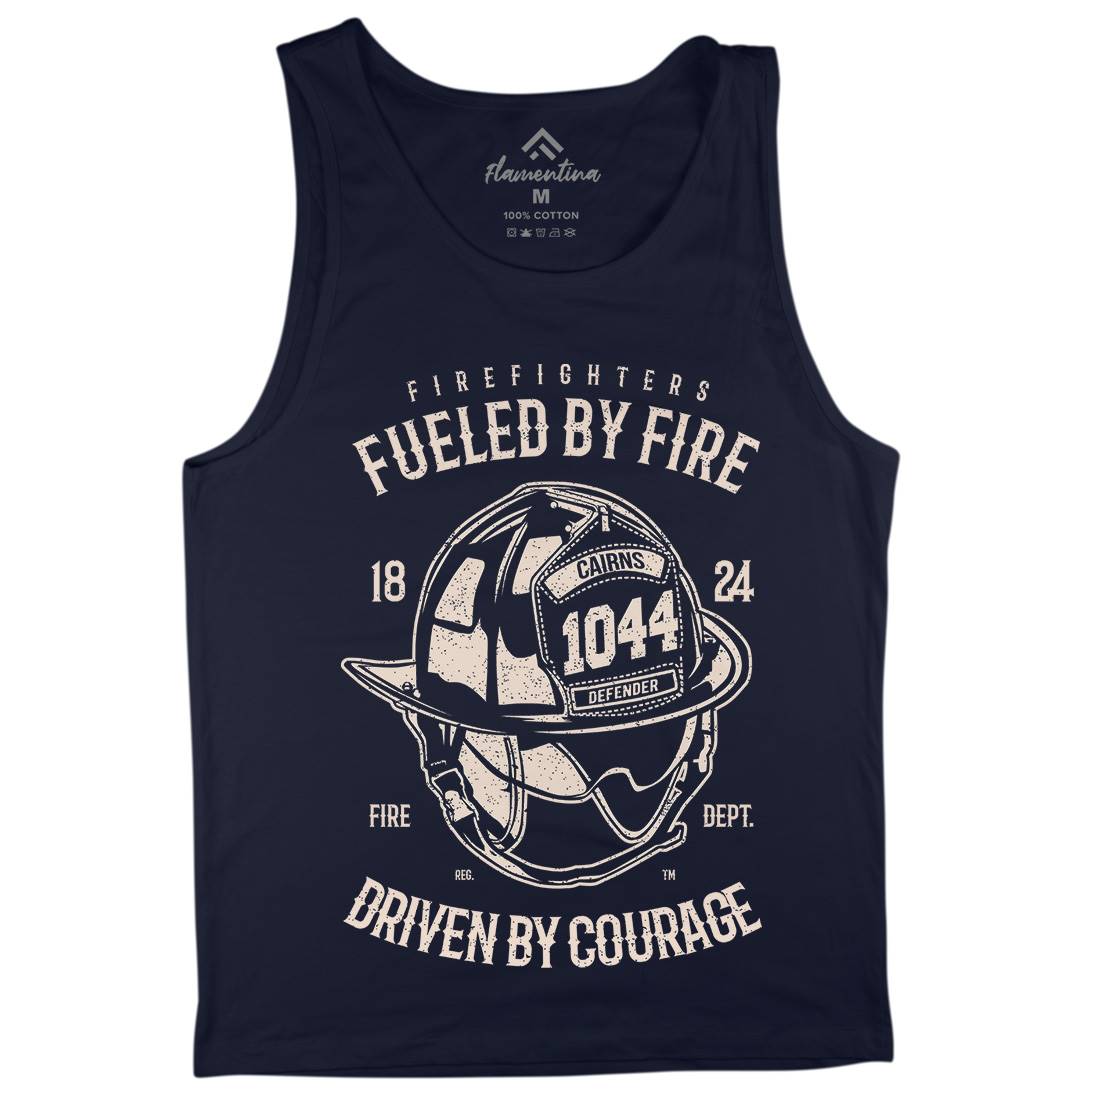 Fuelled By Fire Mens Tank Top Vest Firefighters A667